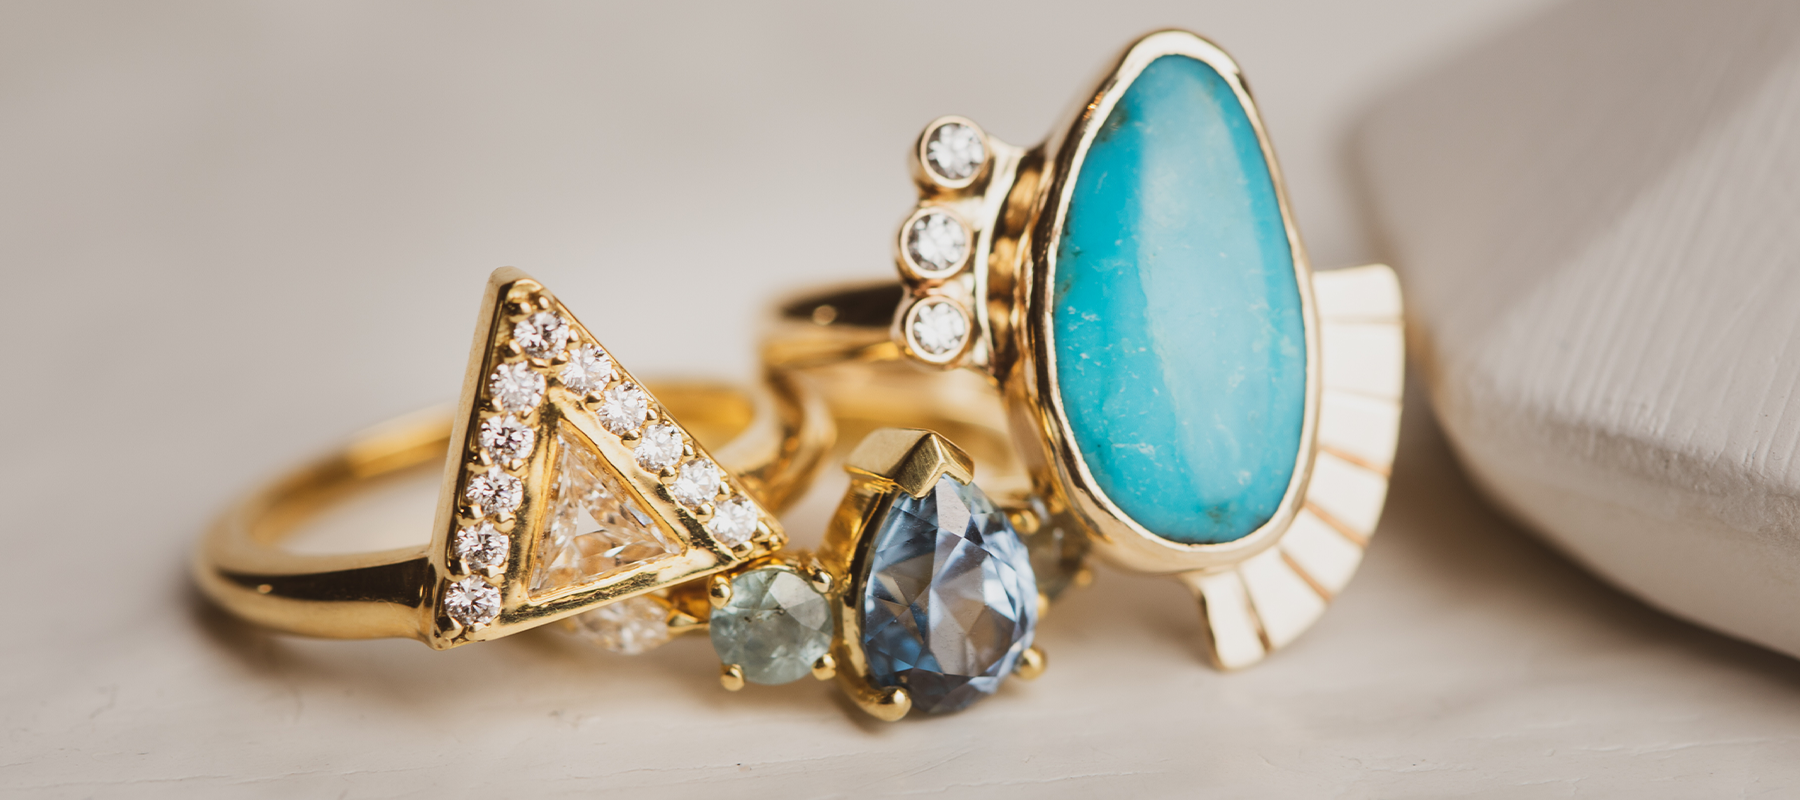 Sapphire, turquoise, diamond gold engagement rings